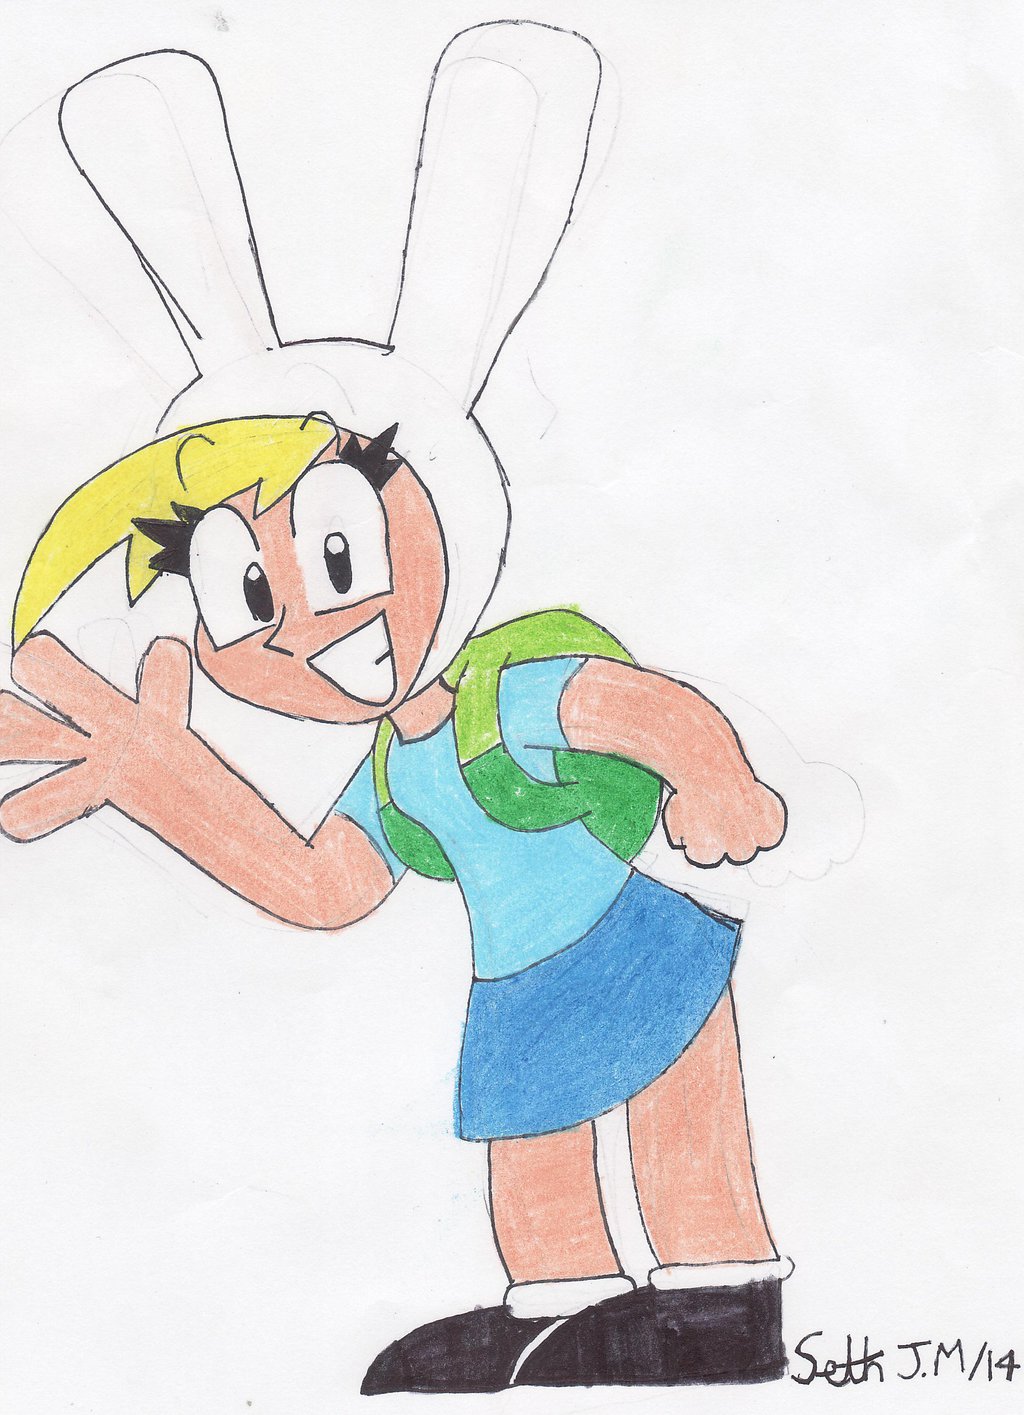 Fionna the Human by UltimateStudios on